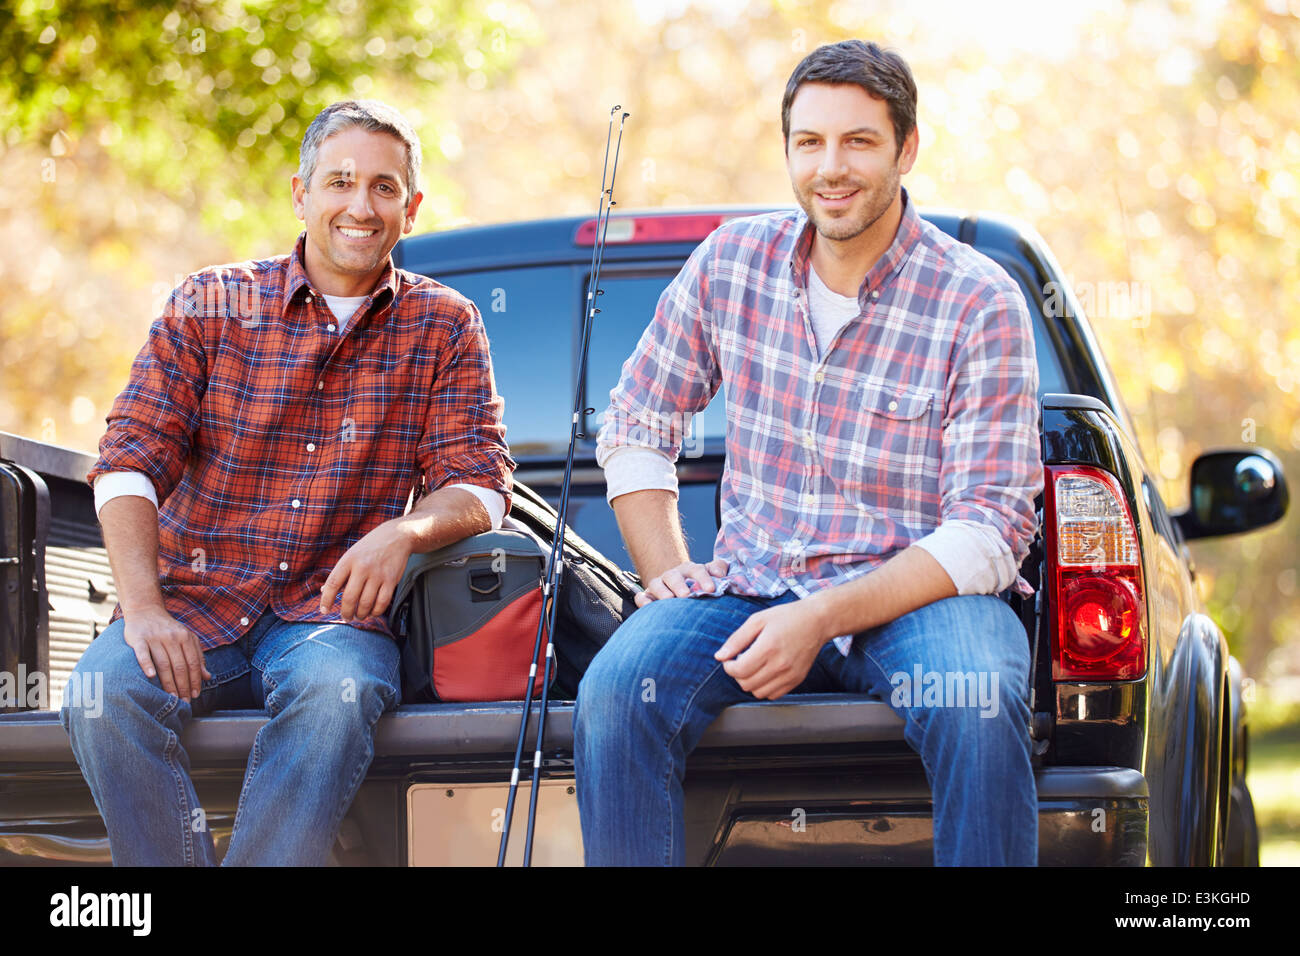 Portrait Of Two Men In Pick Up Truck On Camping Holiday Stock Photo